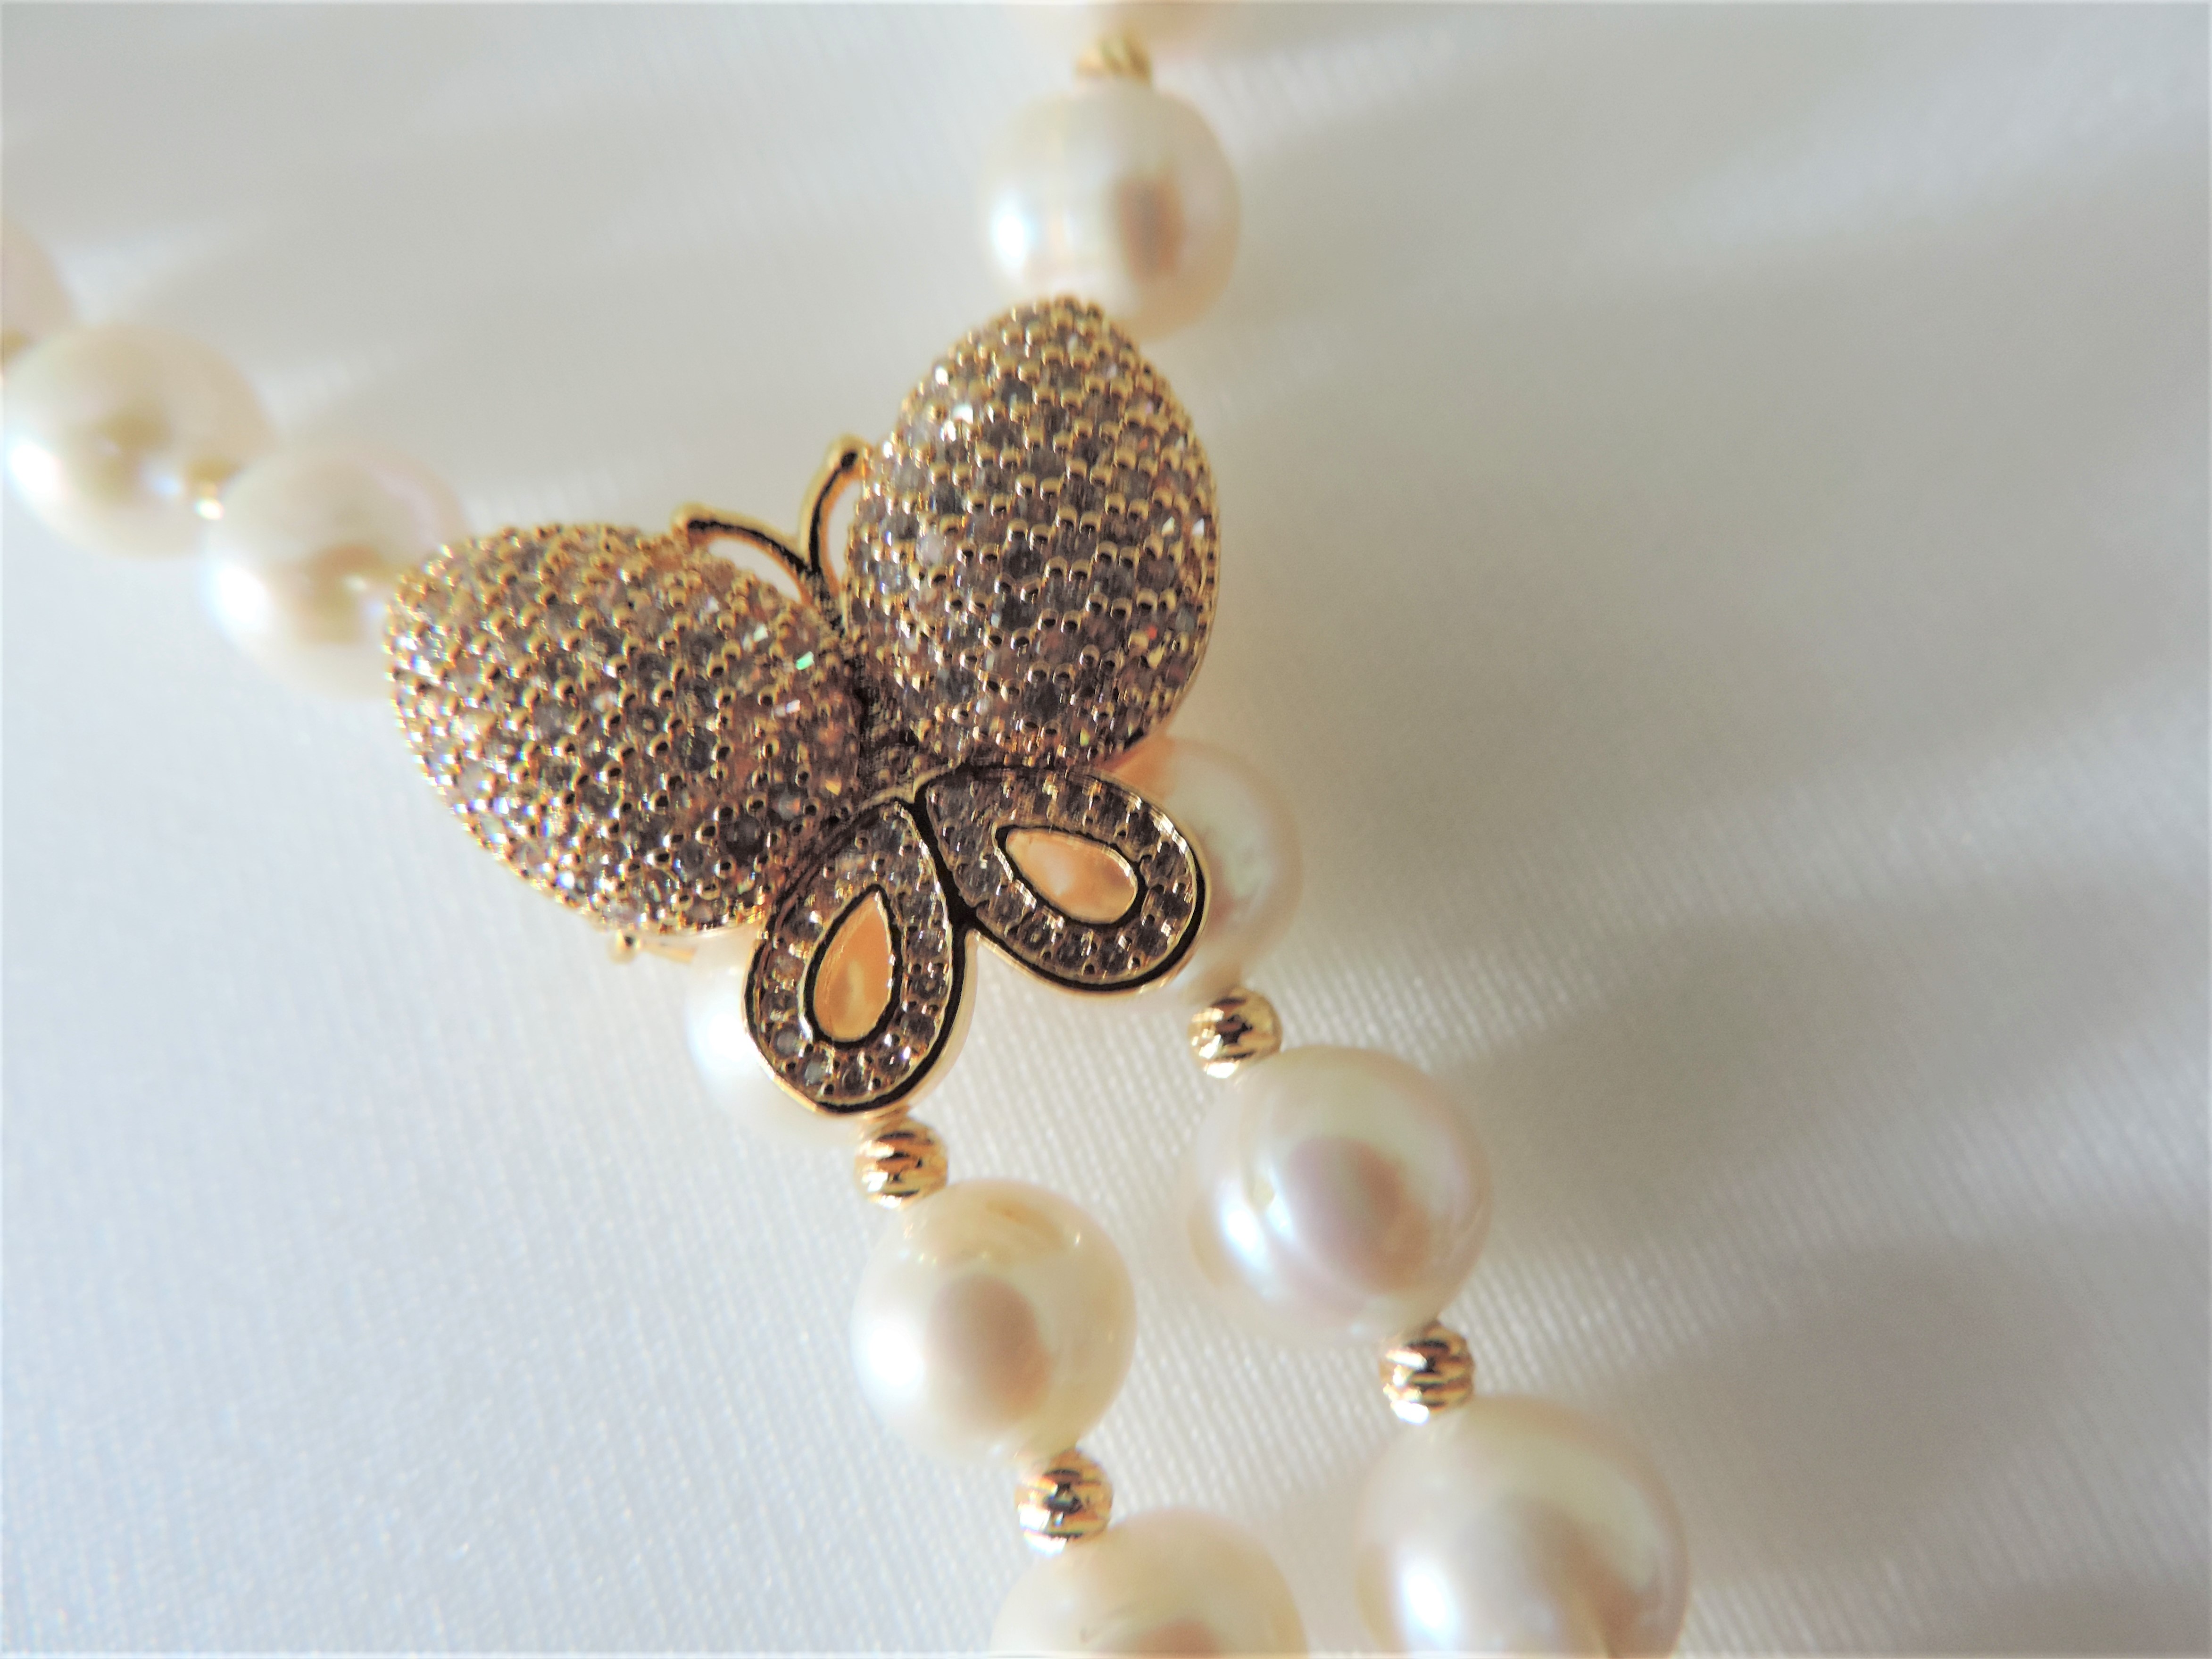 Bespoke Akoya Pearl Lariat Necklace 39 X 9Mm Pearls 38" Long - Image 4 of 6